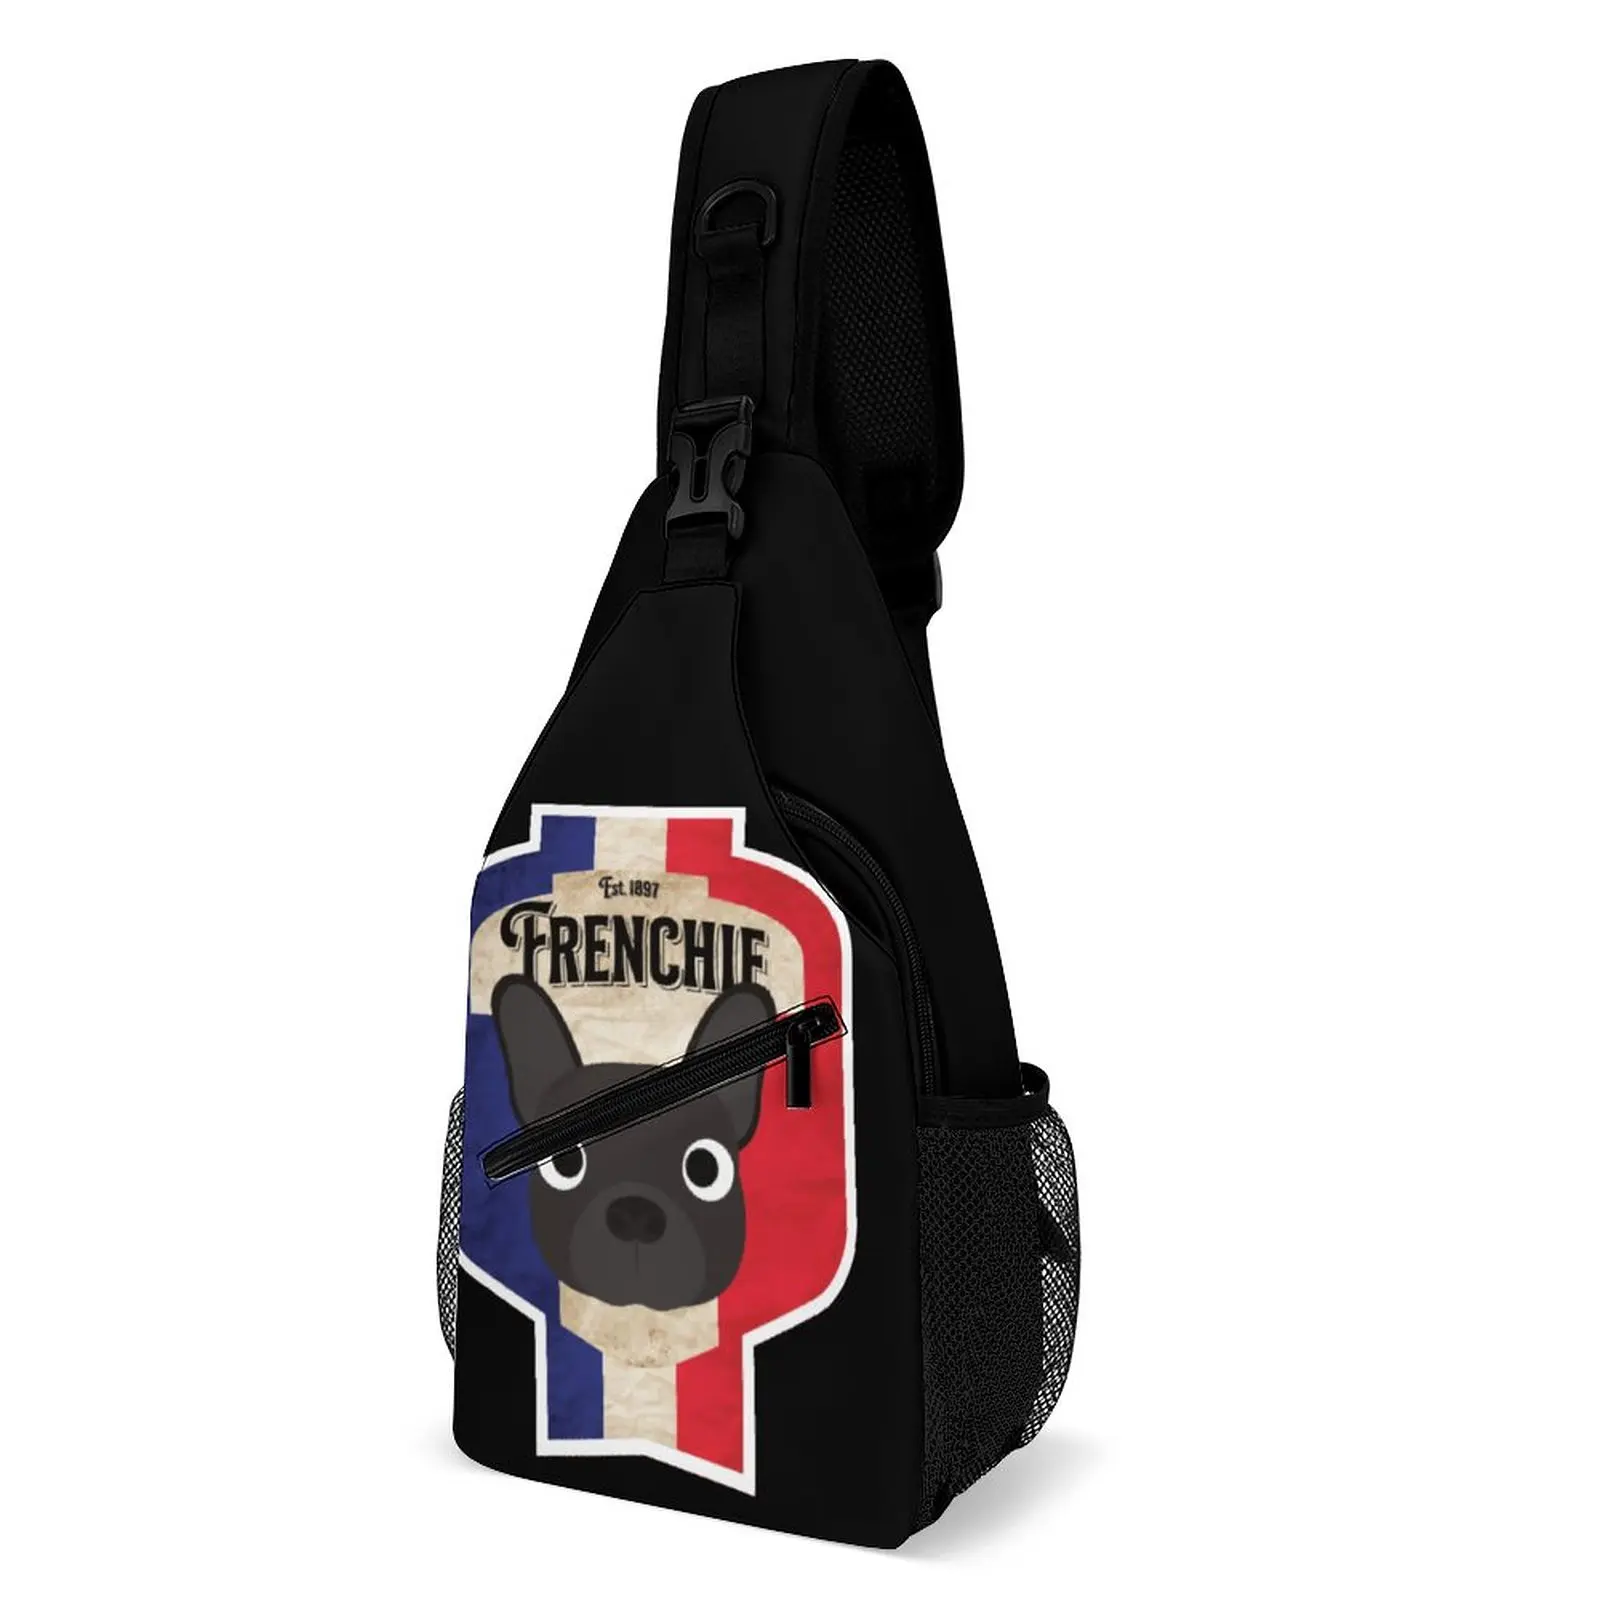 

Frenchie - Distressed French Bulldog Beer Label Design Full Printed Twill Chest Bag Cozy Secure Infantry Pack Schools Unique